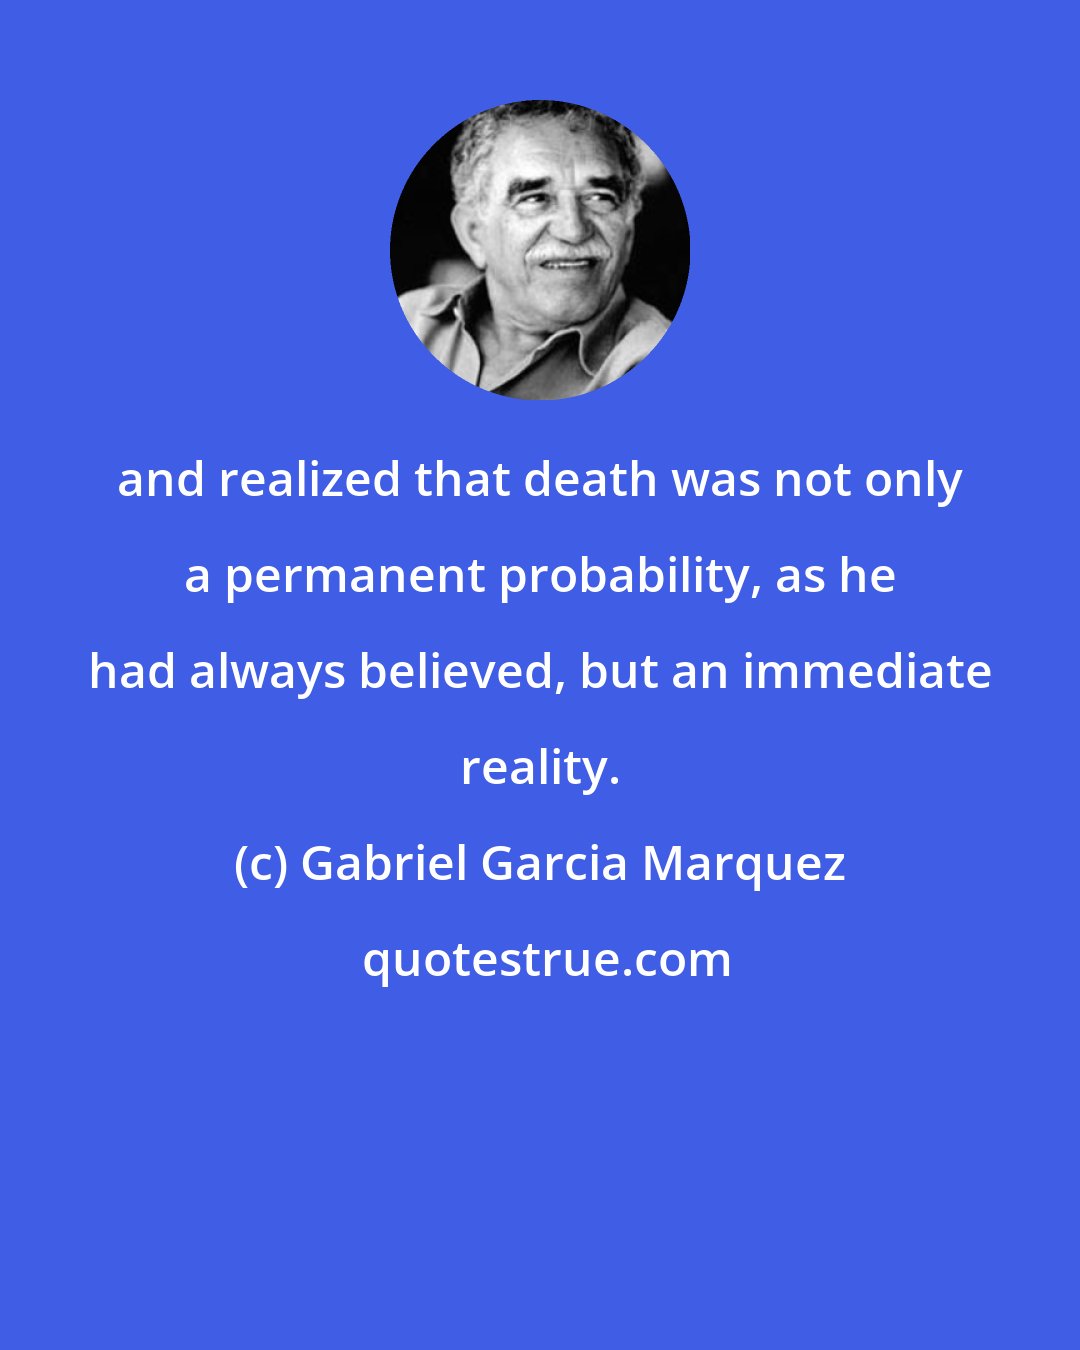 Gabriel Garcia Marquez: and realized that death was not only a permanent probability, as he had always believed, but an immediate reality.